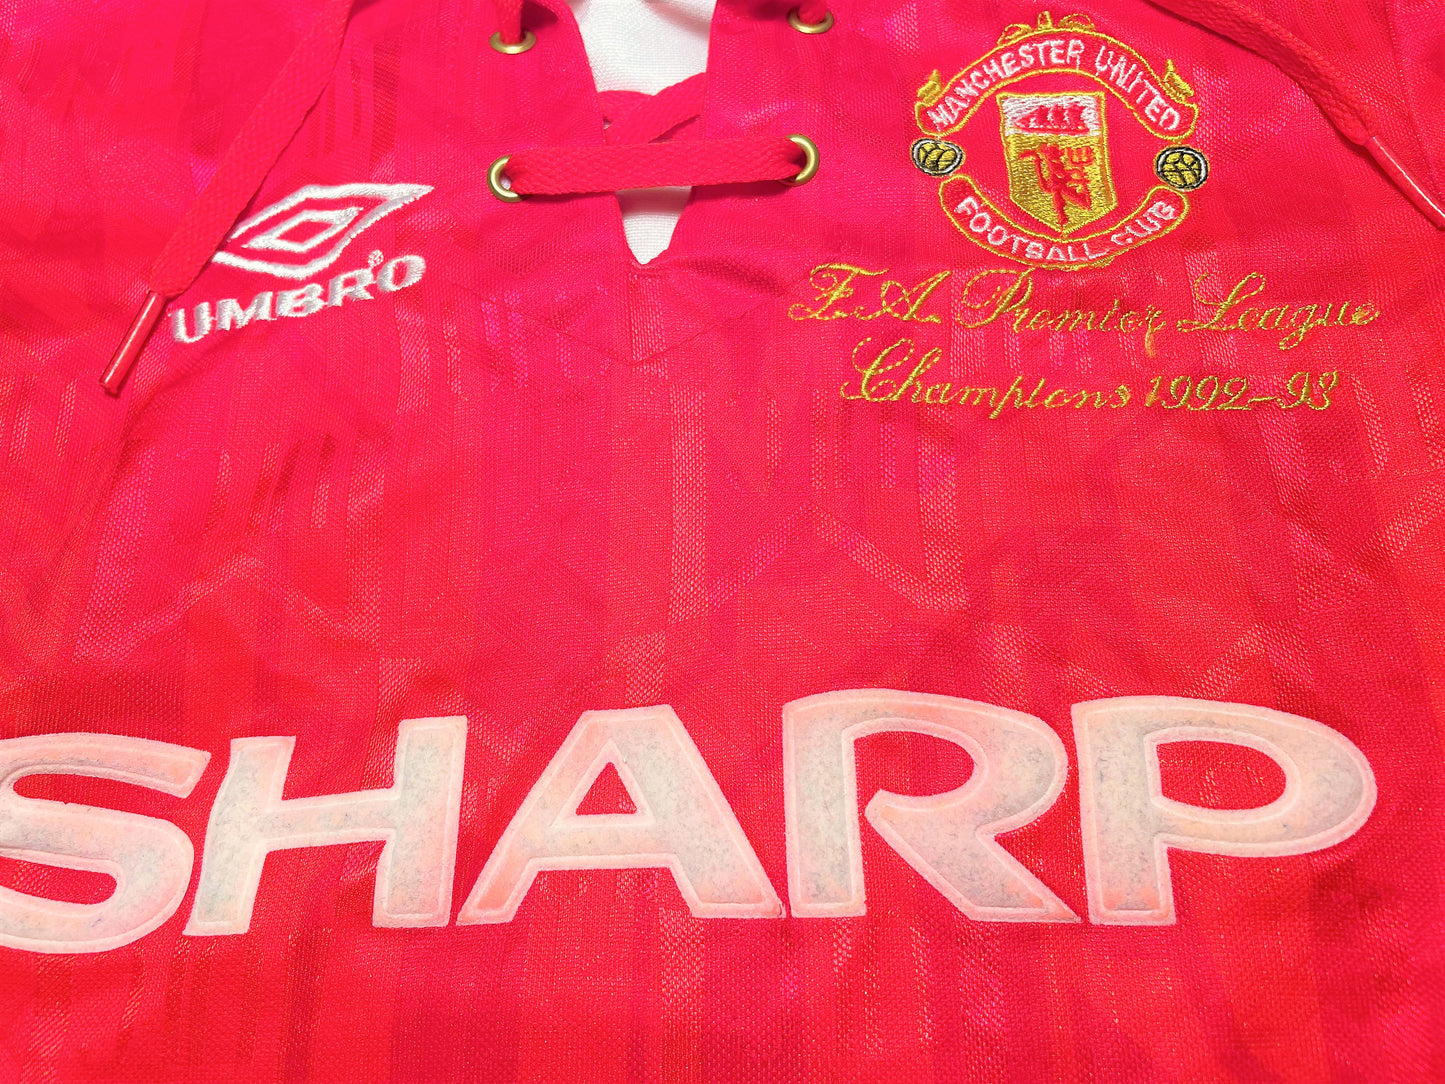 Man United Shirt 1992 (very good) Small Boys. Height 16 inches